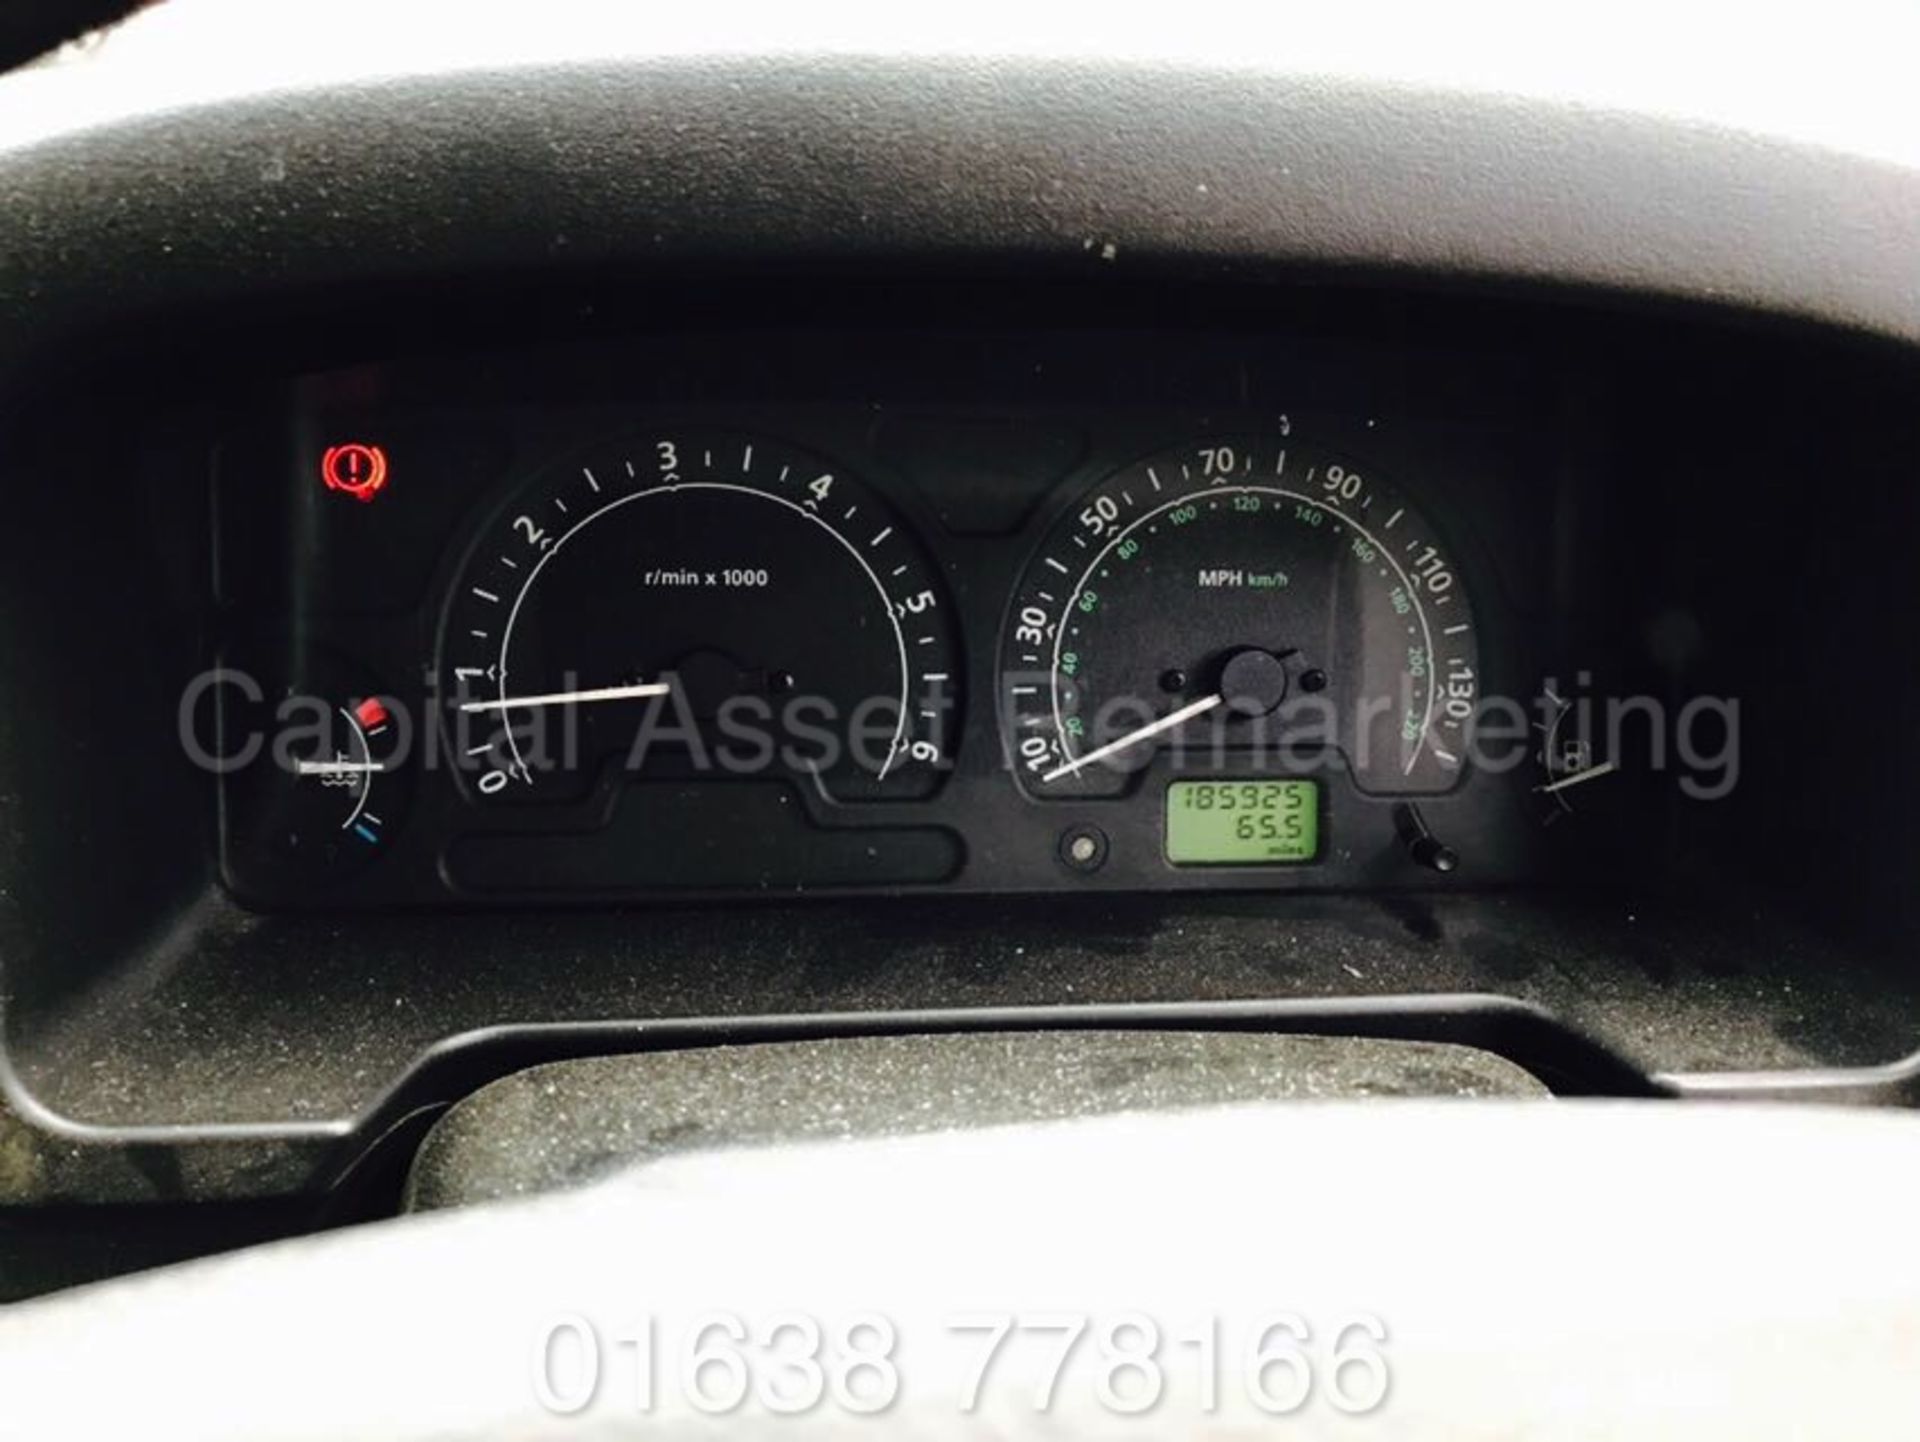 (On Sale) LAND ROVER DISCOVERY (2003 - 03 REG) 'TD5 DIESEL - 7 SEATER' (NO VAT - SAVE 20%) - Image 15 of 15